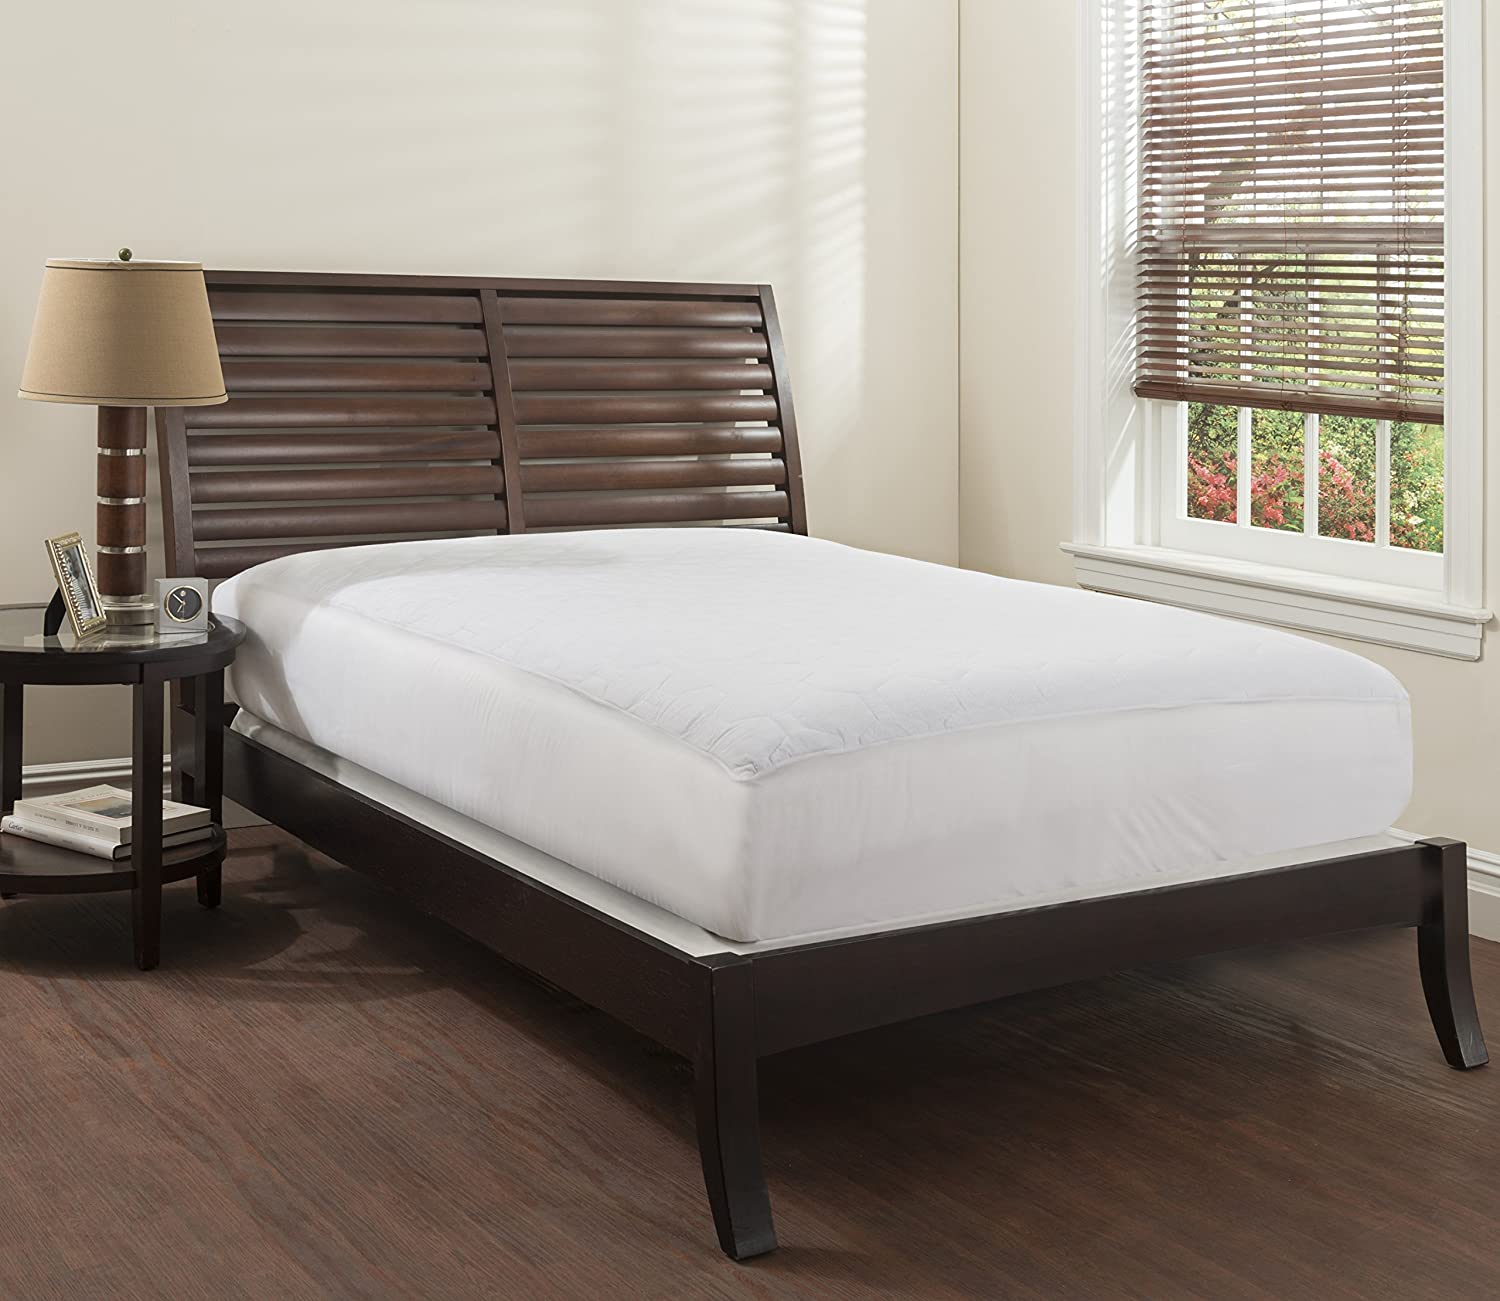 It is not possible to use a mattress pad to make a bed firmer. However, they can add a luxurious feel to your bed.